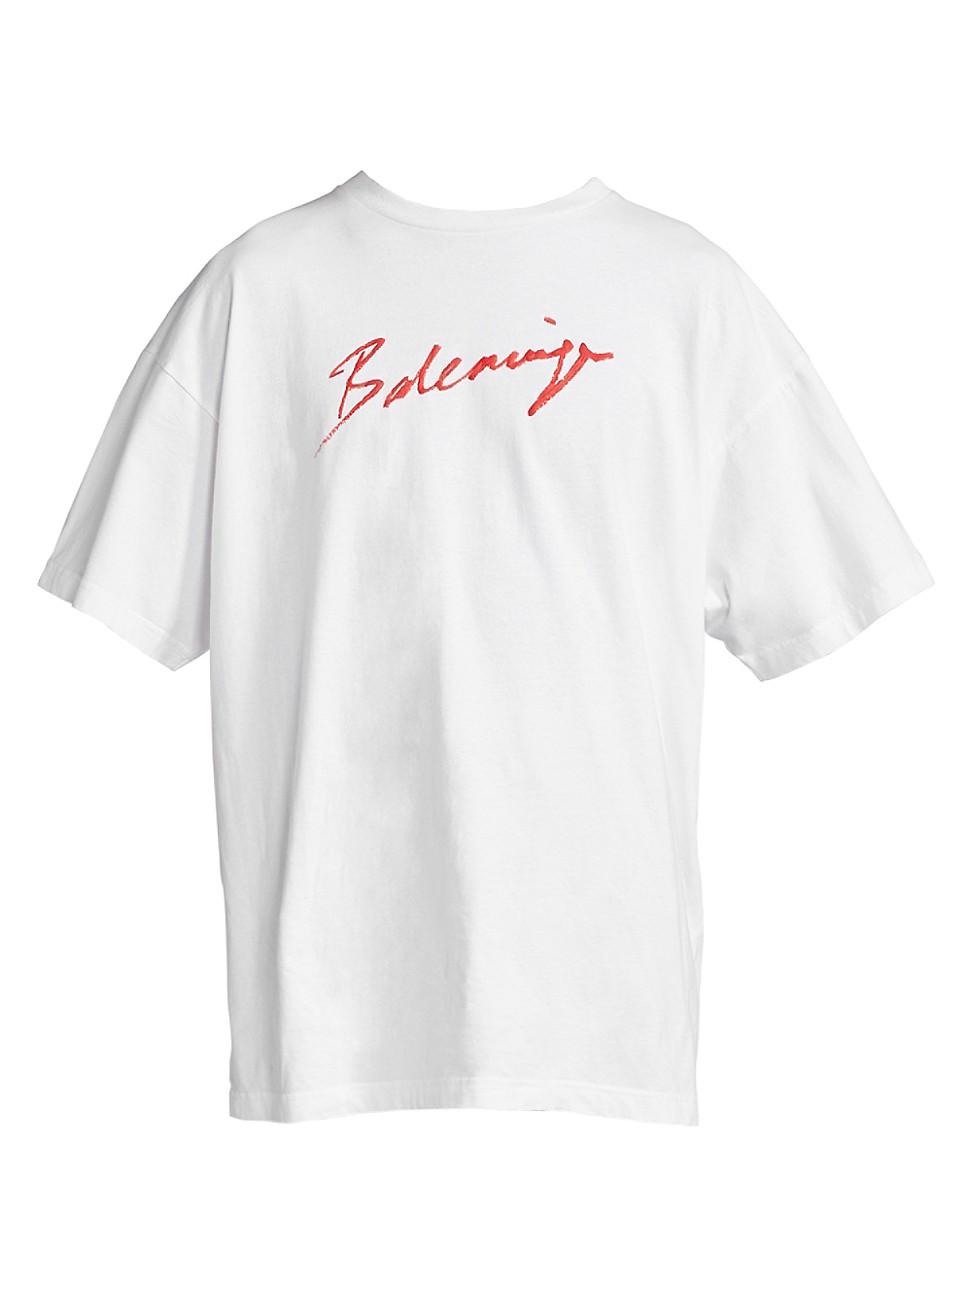 Fascinate rim værdighed Balenciaga Cursive Graphic T-shirt in White for Men | Lyst